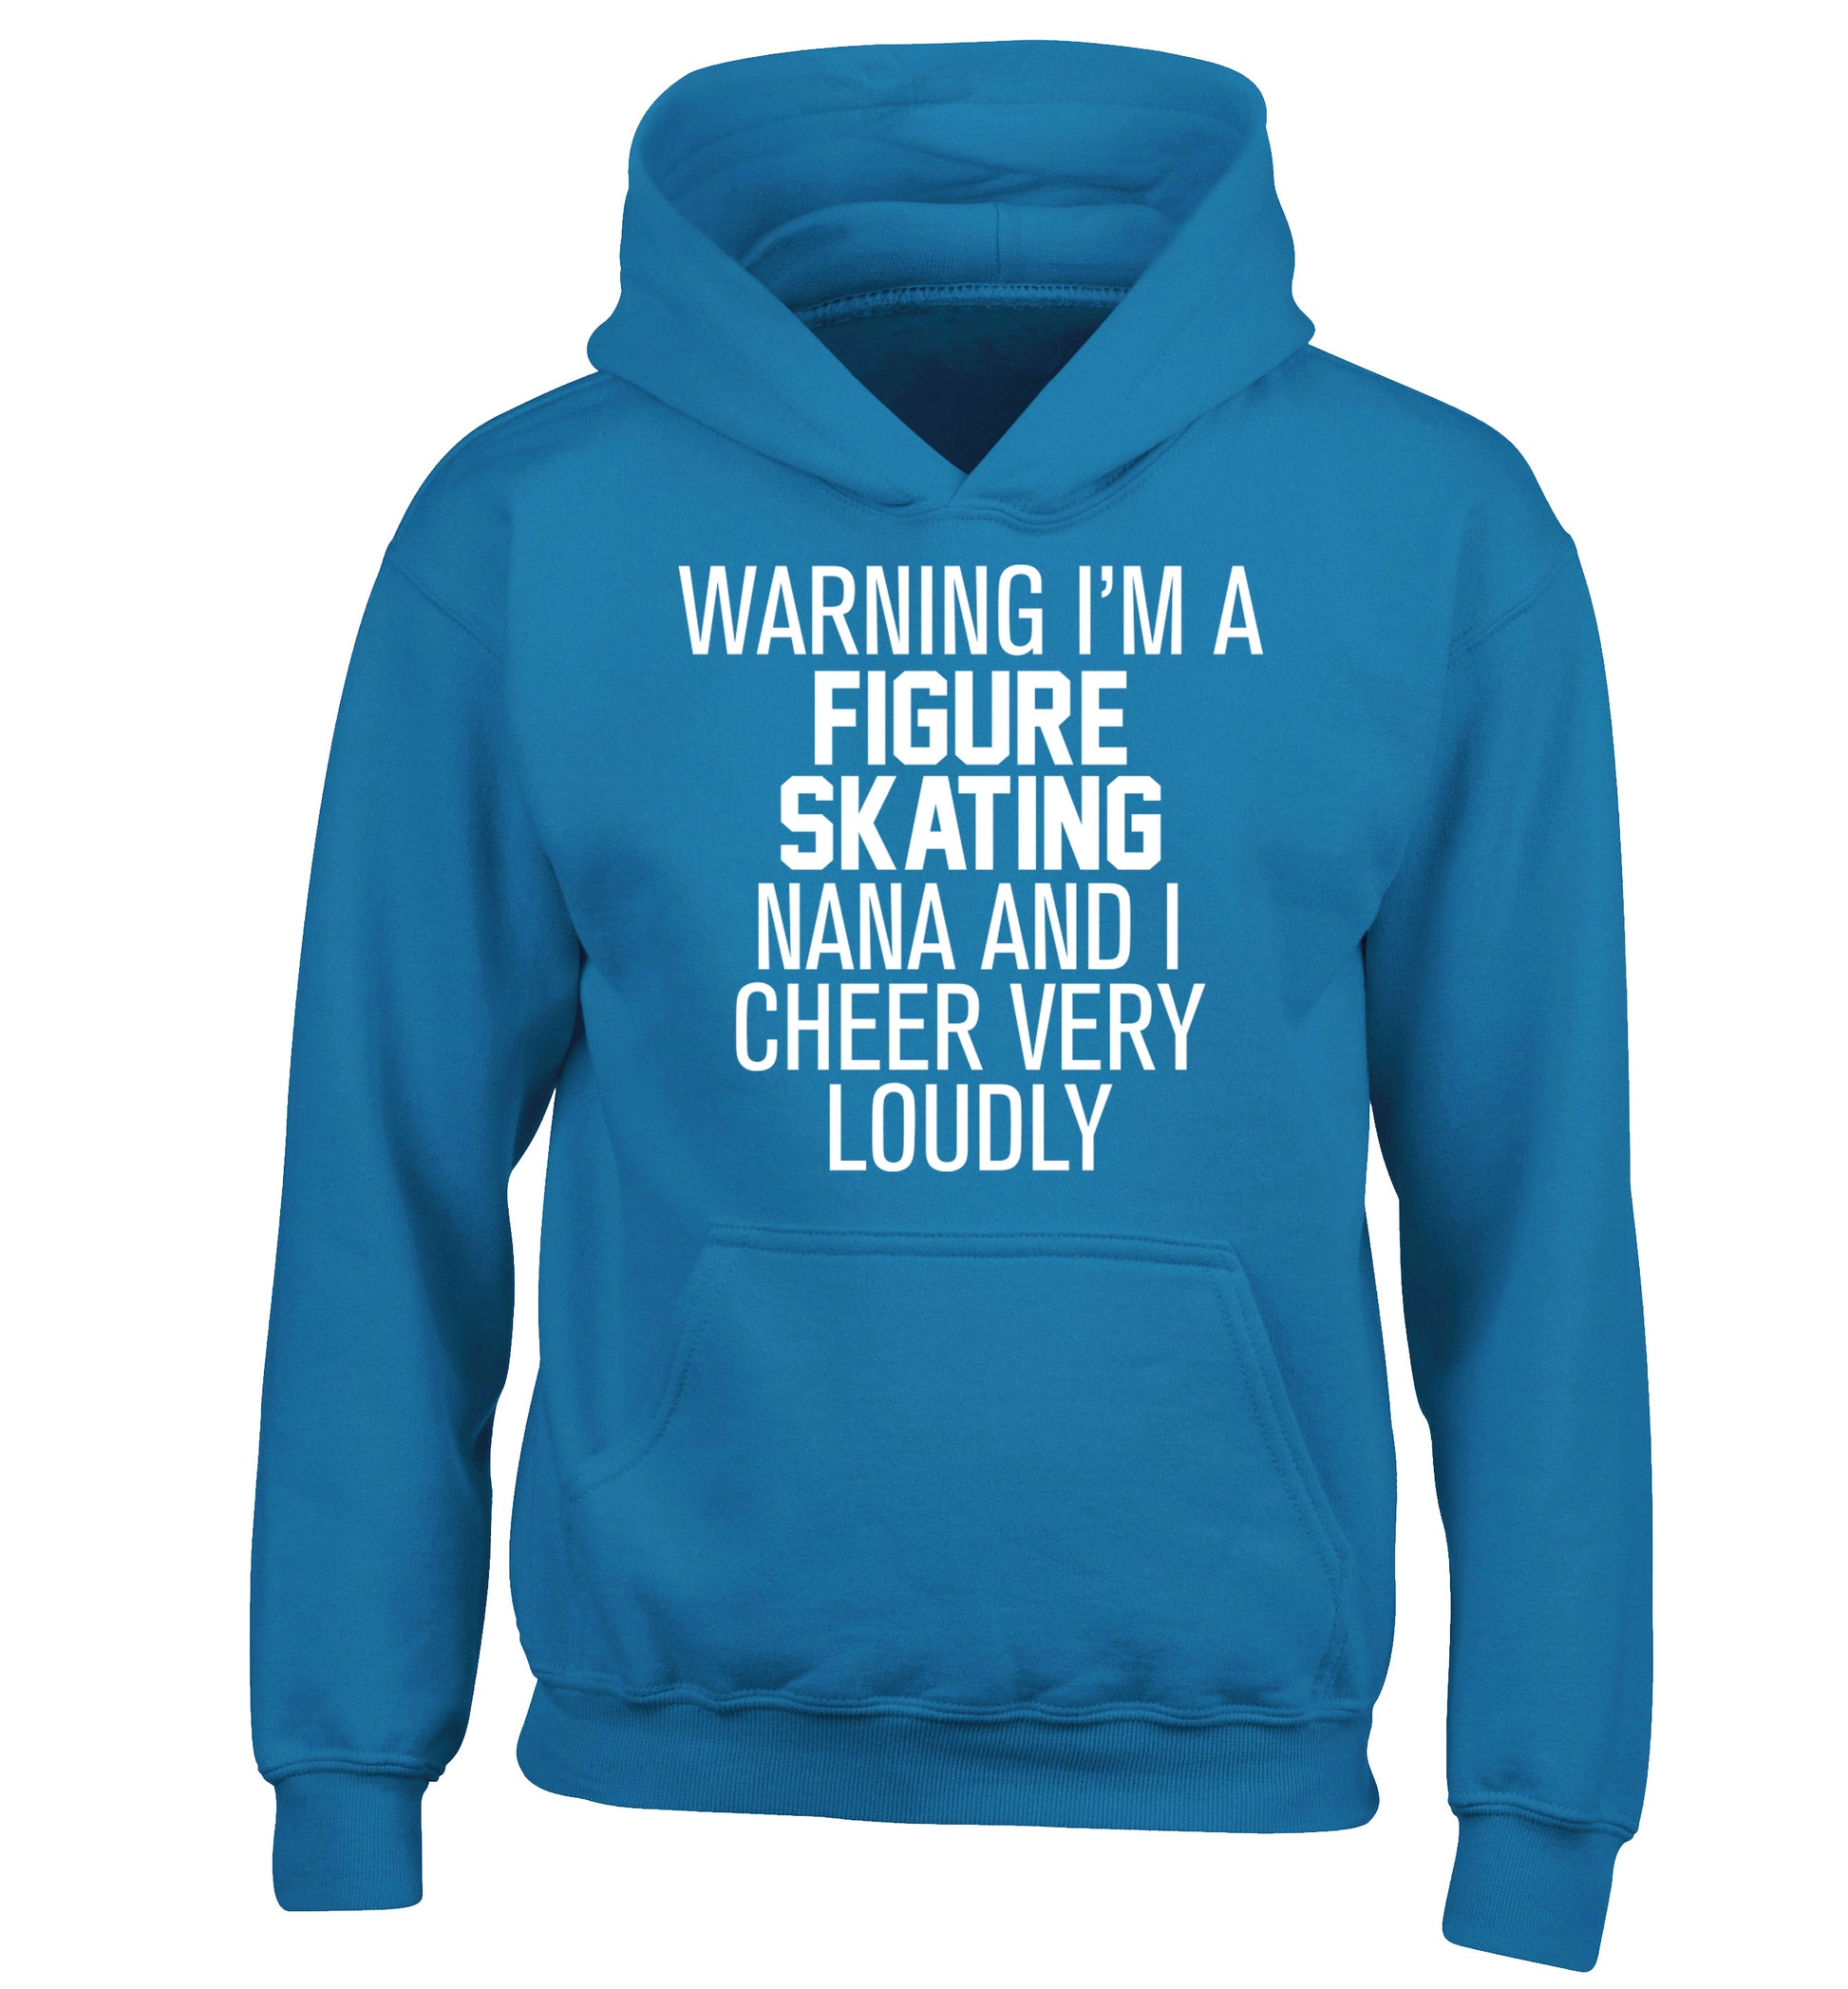 Warning I'm a figure skating nana and I cheer very loudly children's blue hoodie 12-14 Years